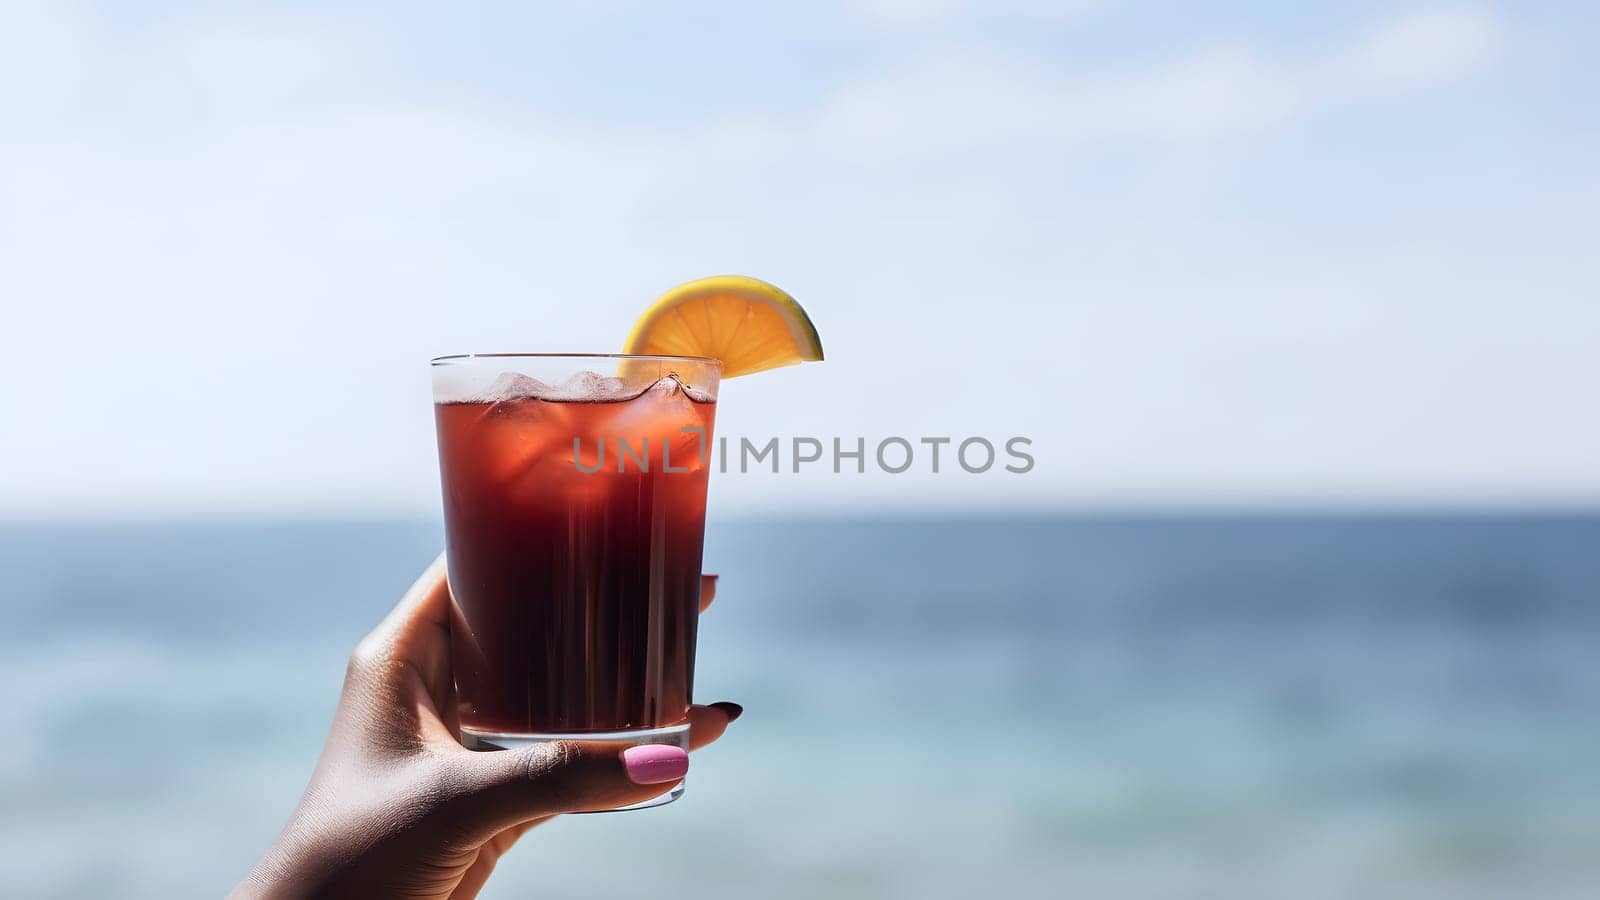 african american hand holding glass of cocktail on blurry sea horizon background at sunny day, neural network generated image by z1b